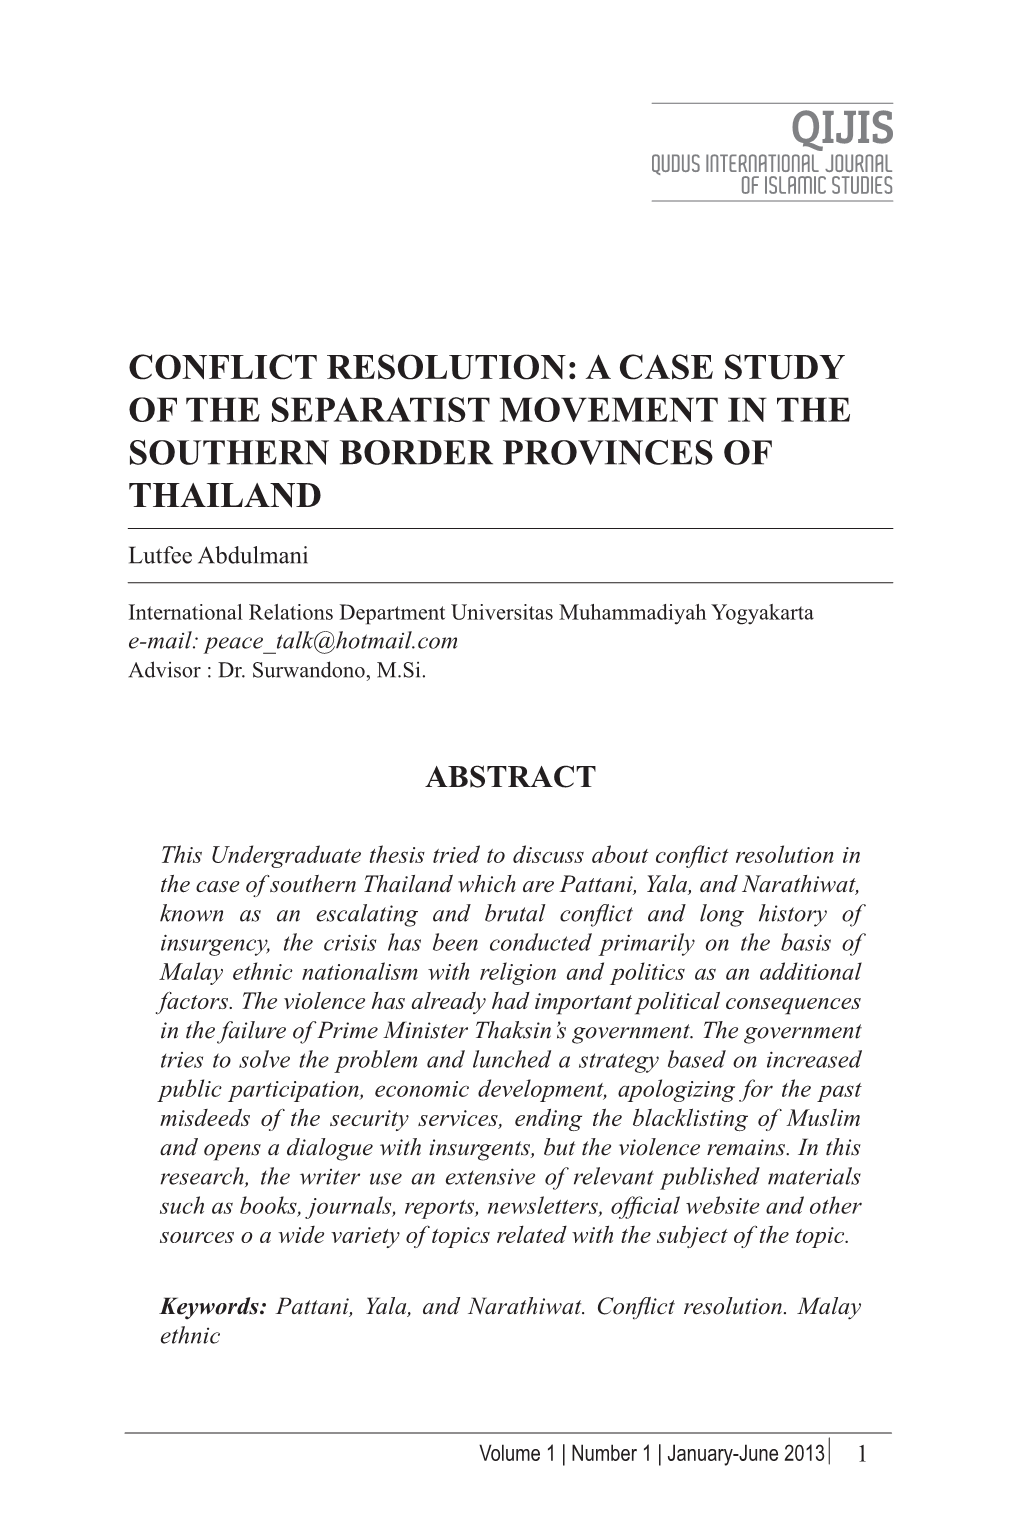 Conflict Resolution: a Case Study of the Separatist Movement in the Southern Border Provinces of Thailand